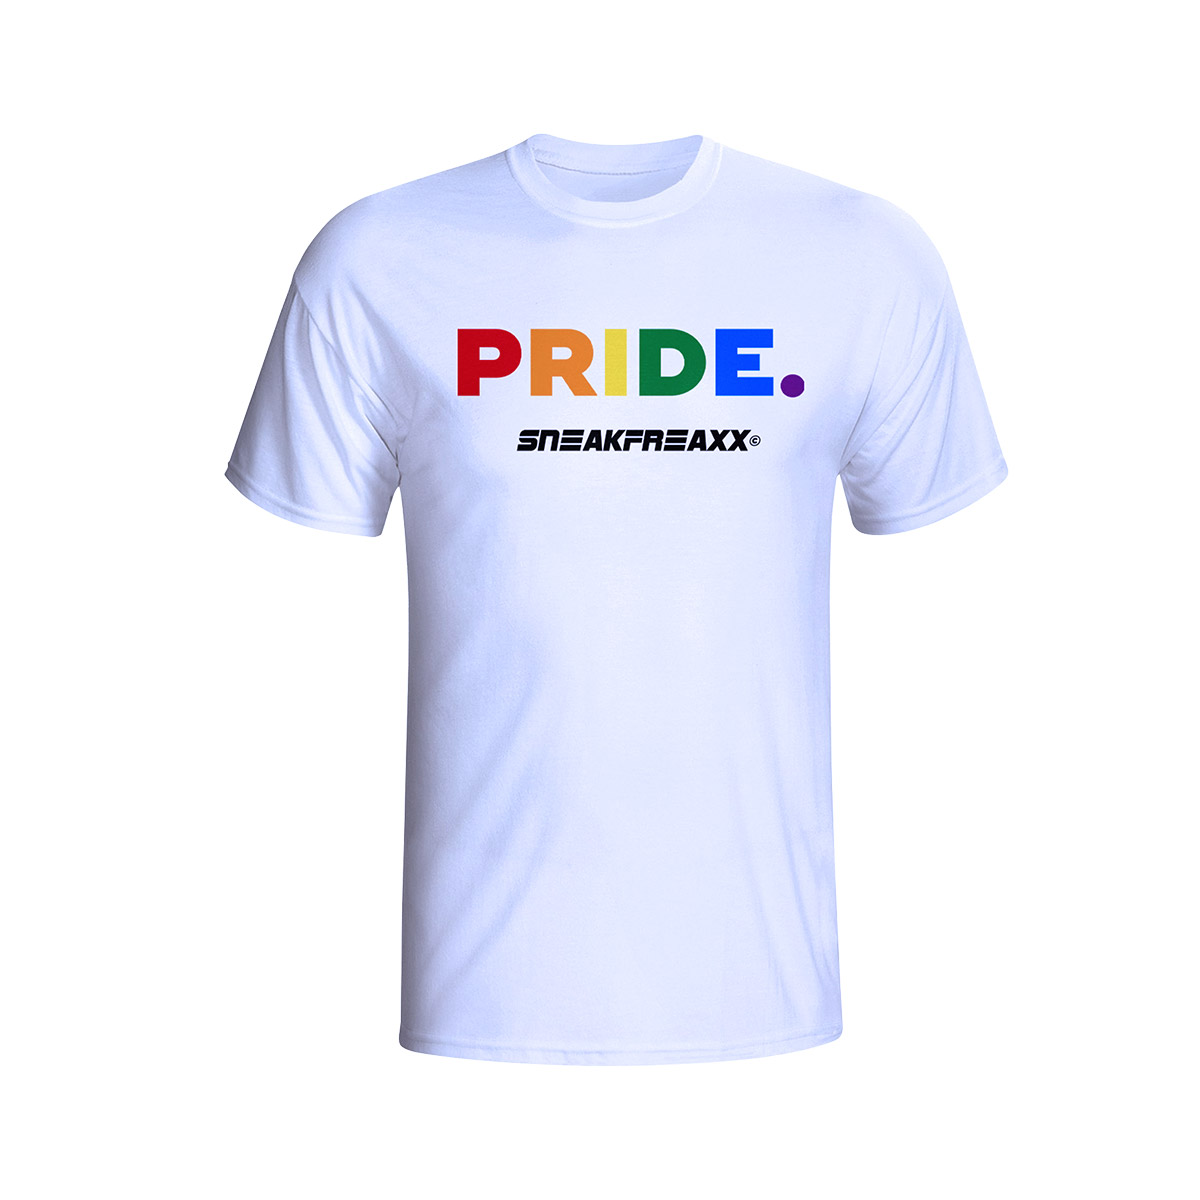 T-SHIRT - SNEAKFREAXX PRIDE I